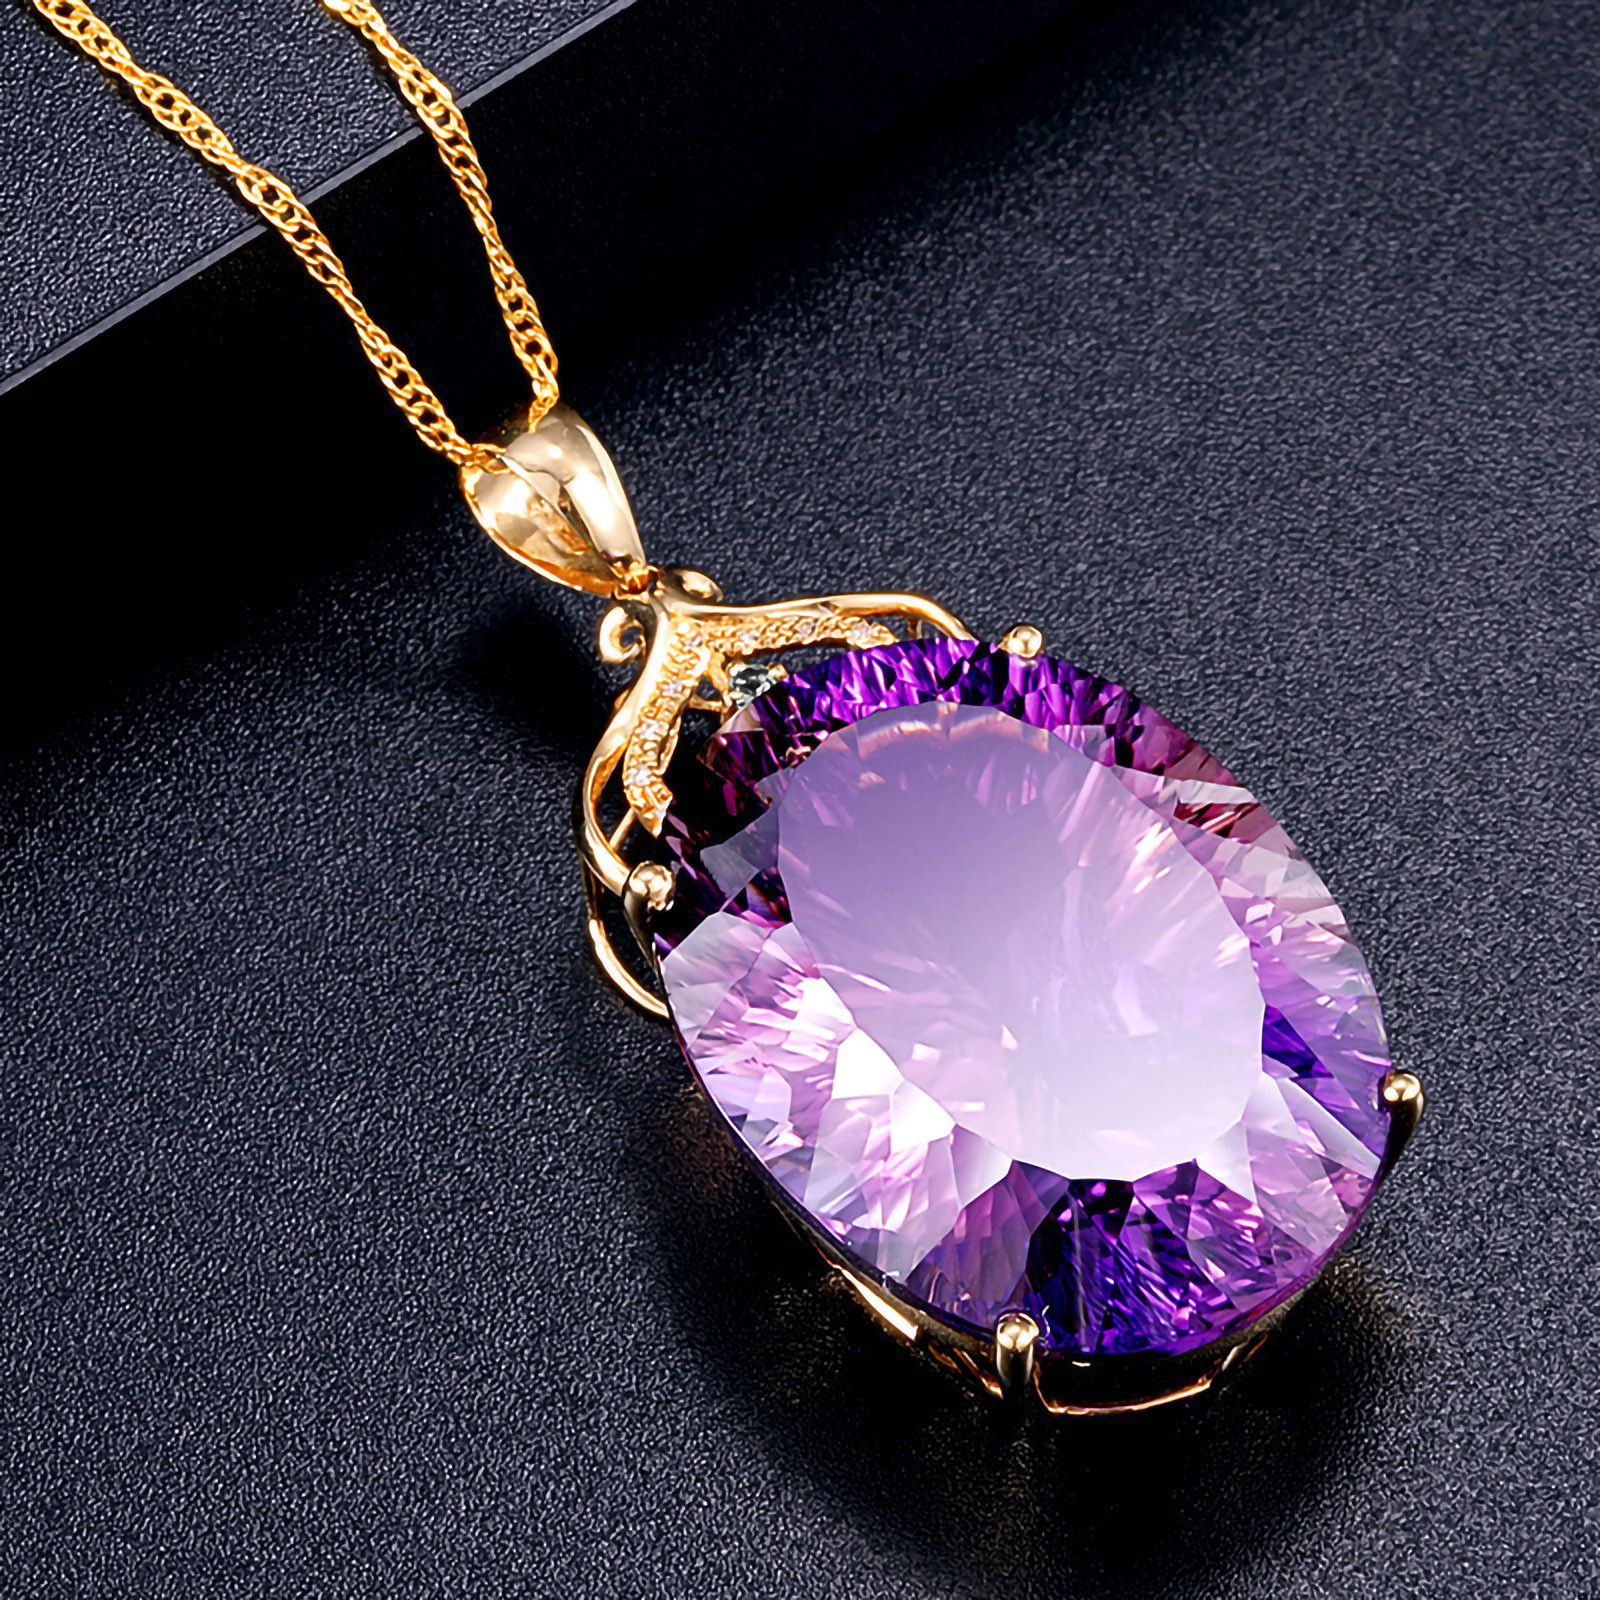 Apmemiss Wholesale European And American Ladies Fashion Luxury Amethyst Pendant Necklace Amethyst Gemstone Necklace Jewelry - image 3 of 8